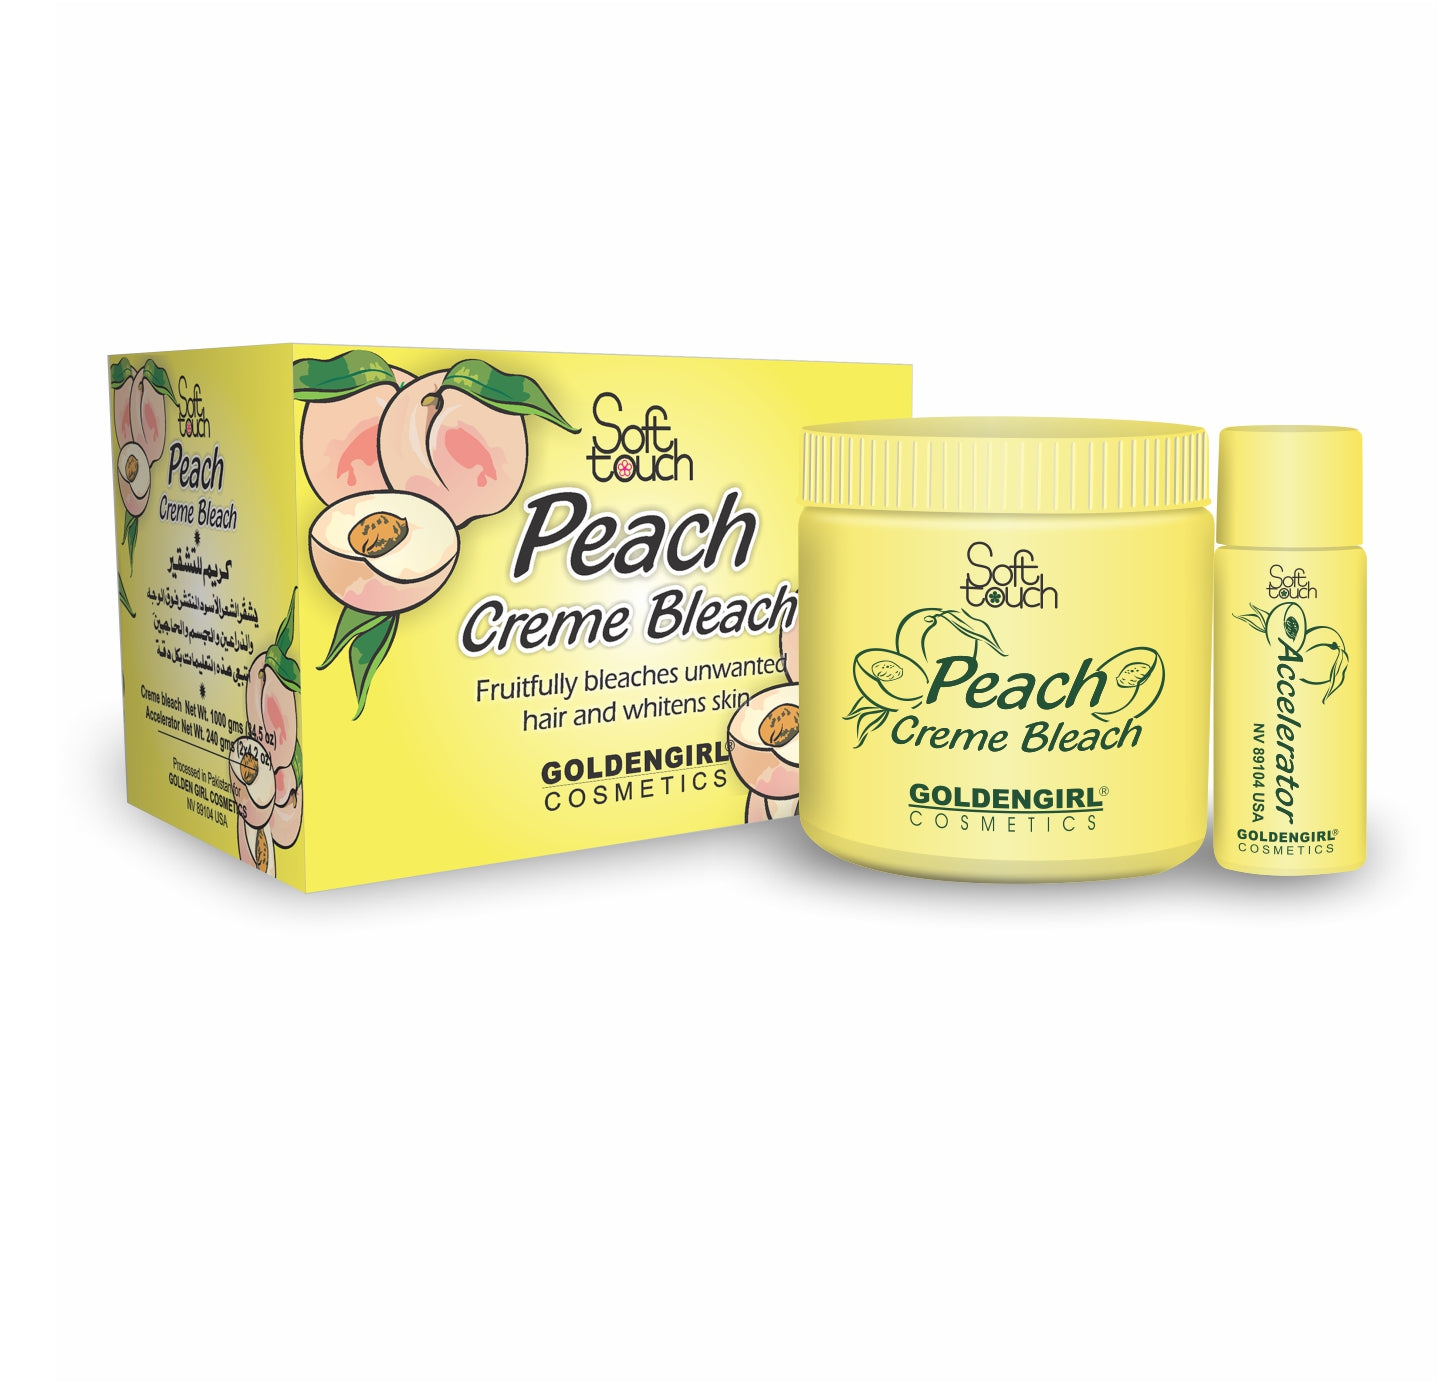 Golden Girl Peach Creme Bleach makes unwanted hair on face, arms and legs invisible in minutes. The vitamin C rich peach is known worldwide as the "Queen of fruit" because of its distinctive flavor and delicate fragrance. It is nature's richest source of antioxidant, vitamin A and phytochemicals that are important to healthy skin. Peach Creme Bleach effectively bleaches excess dark hair while the phytochemicals whiten your skin.